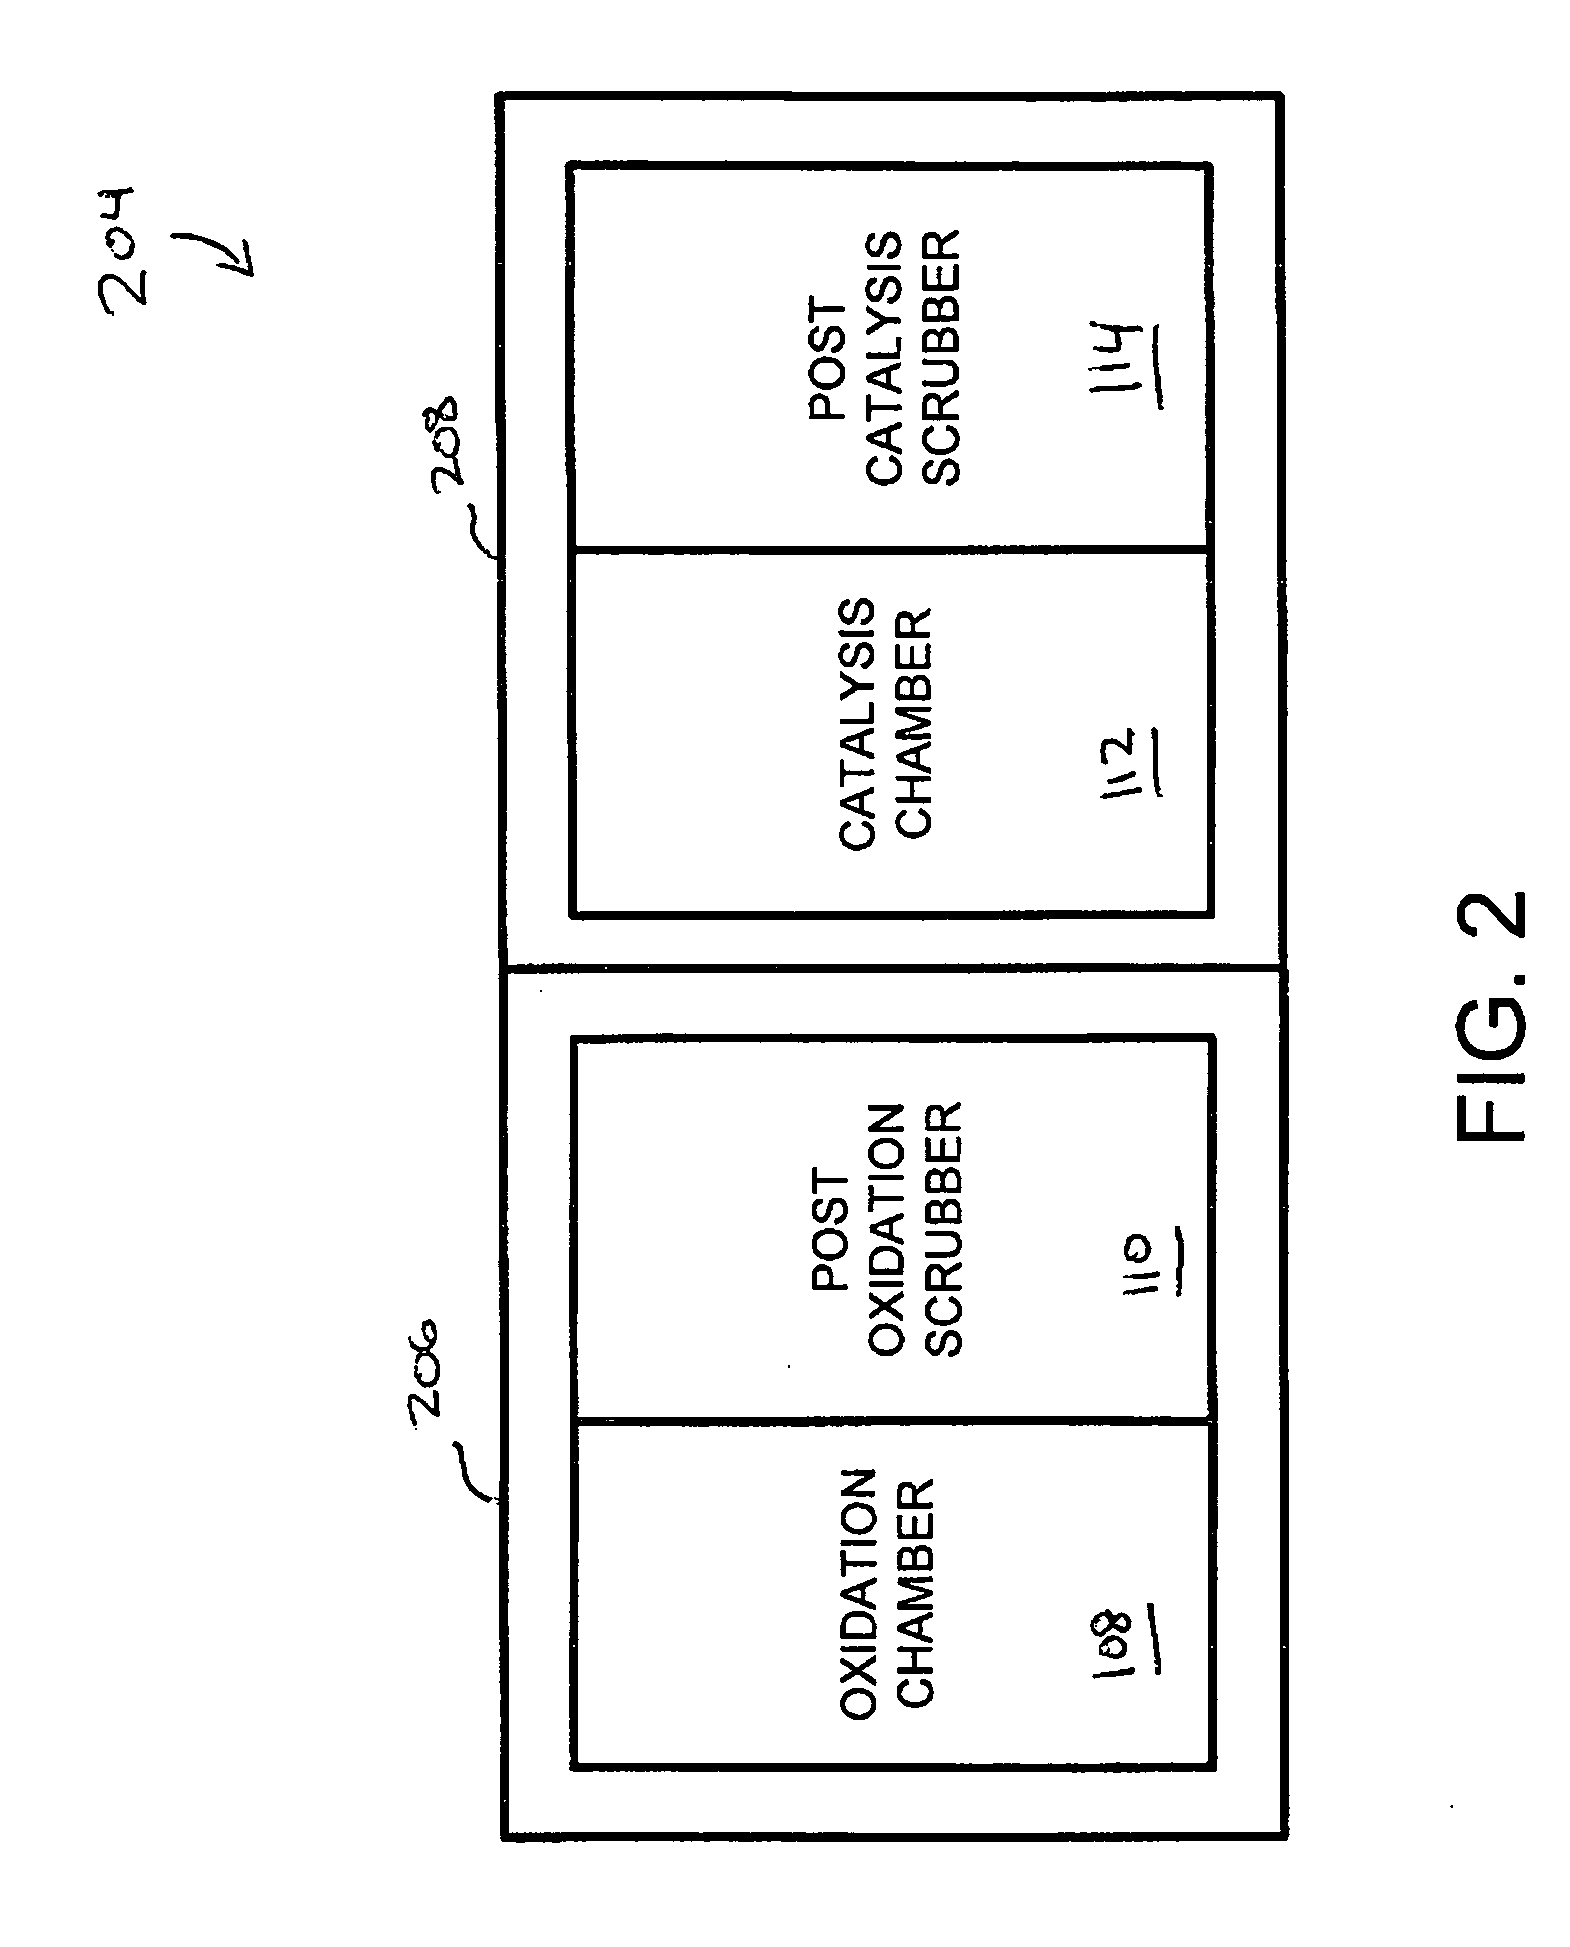 Methods and apparatus for process abatement